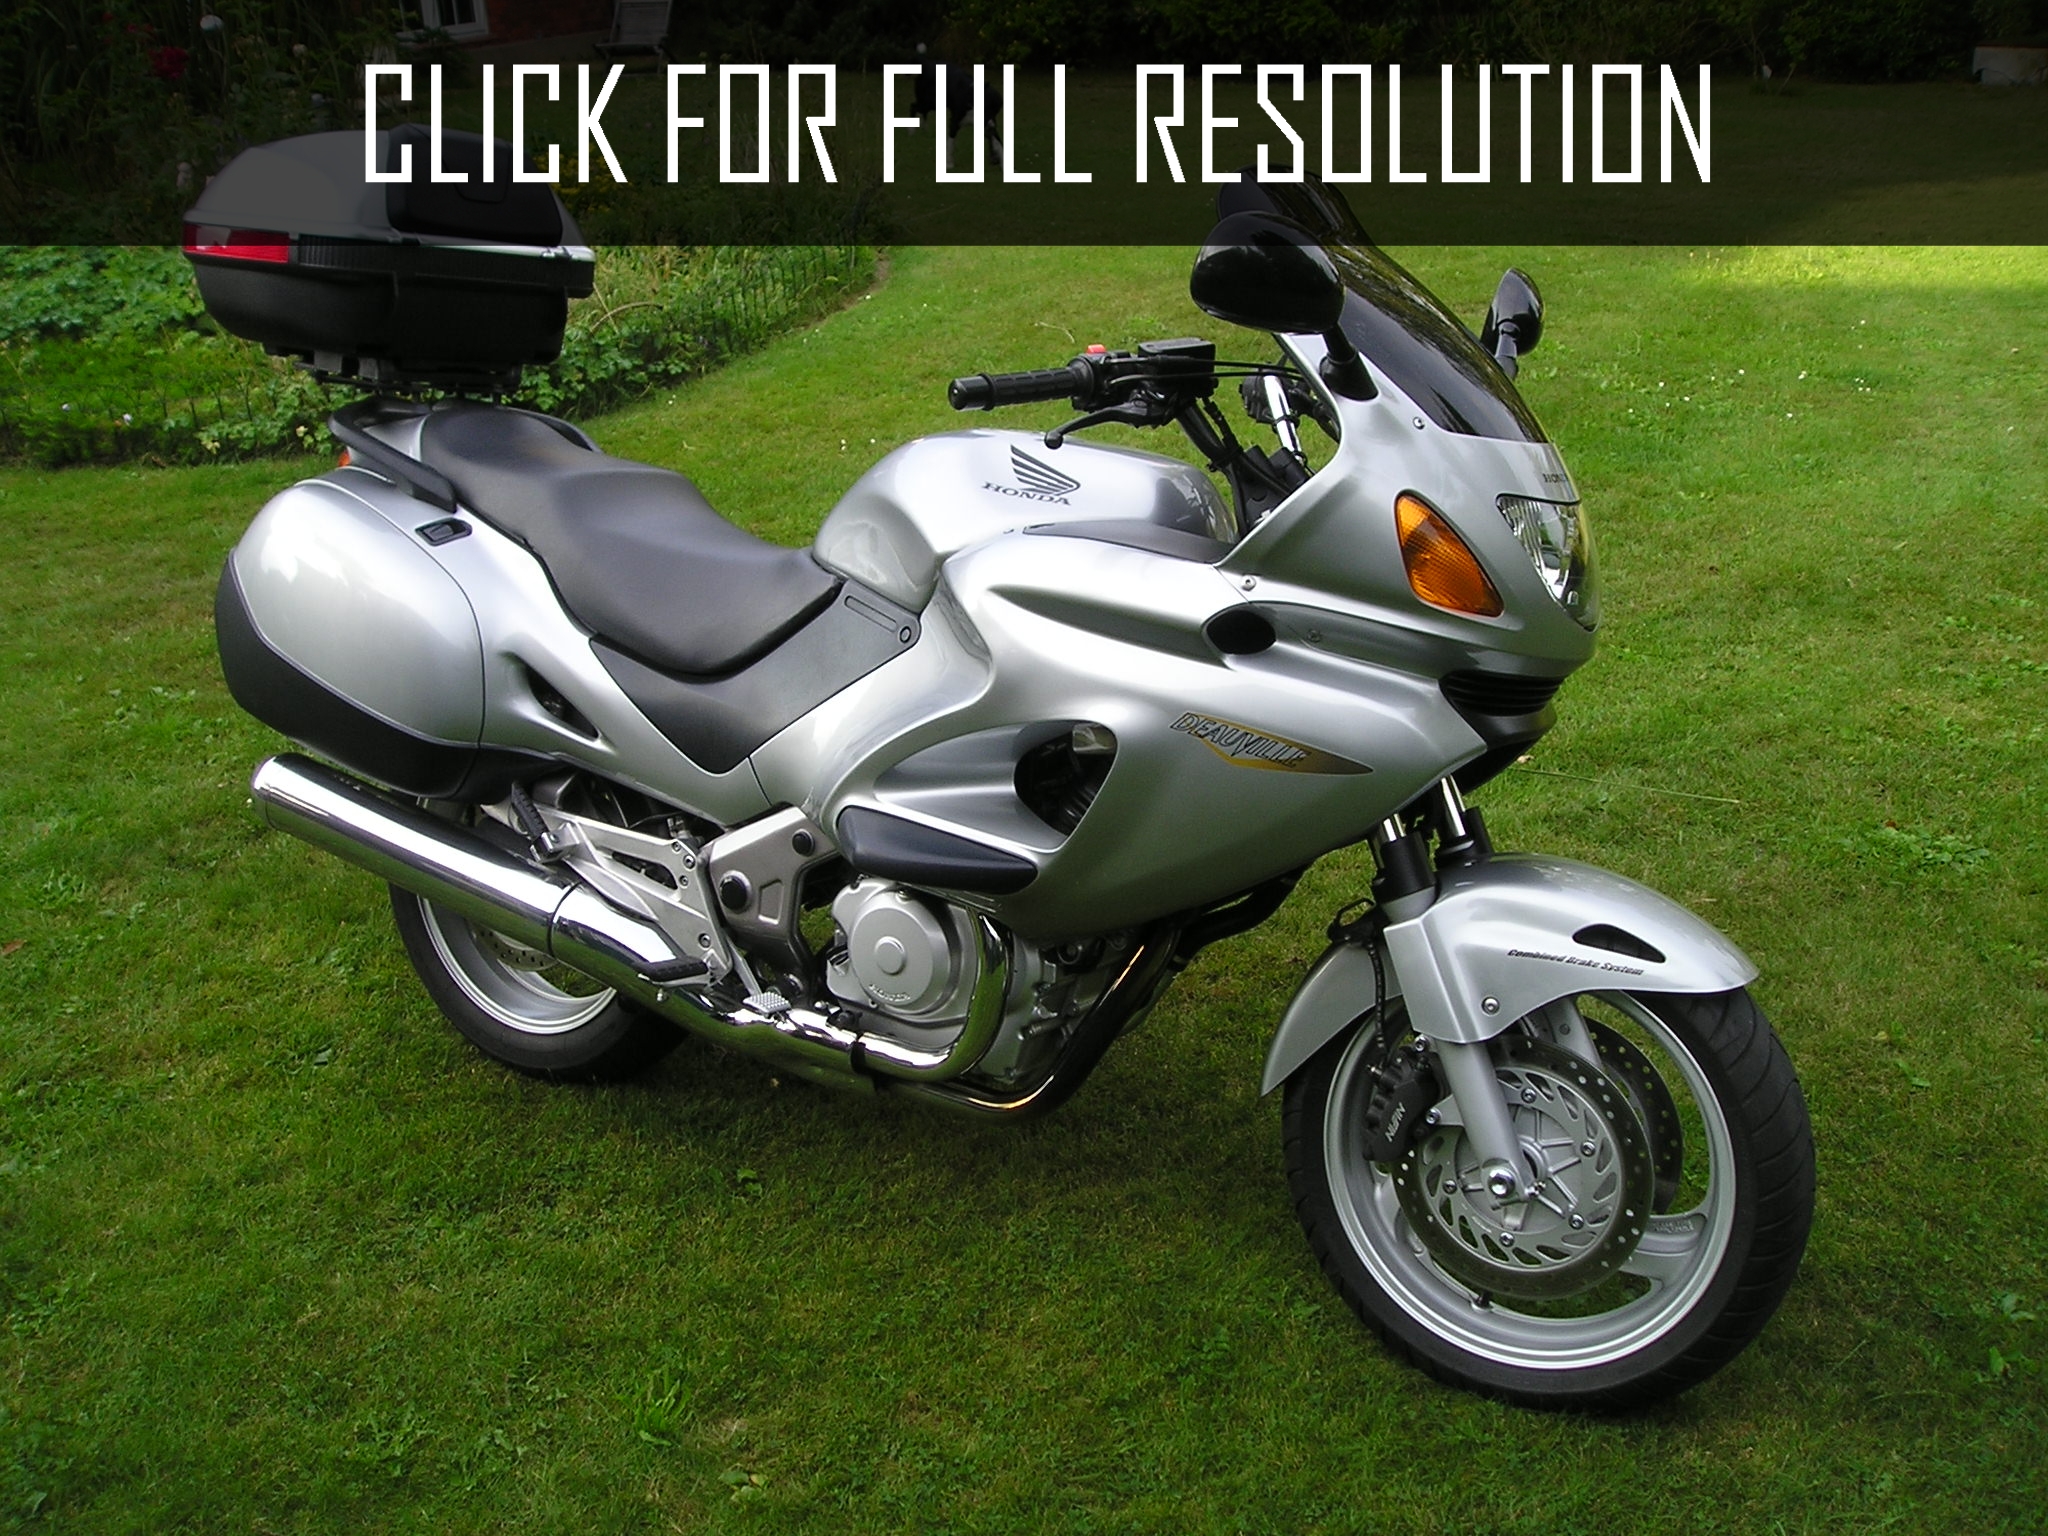 Honda Nt 650 V Deauville reviews, prices, ratings with